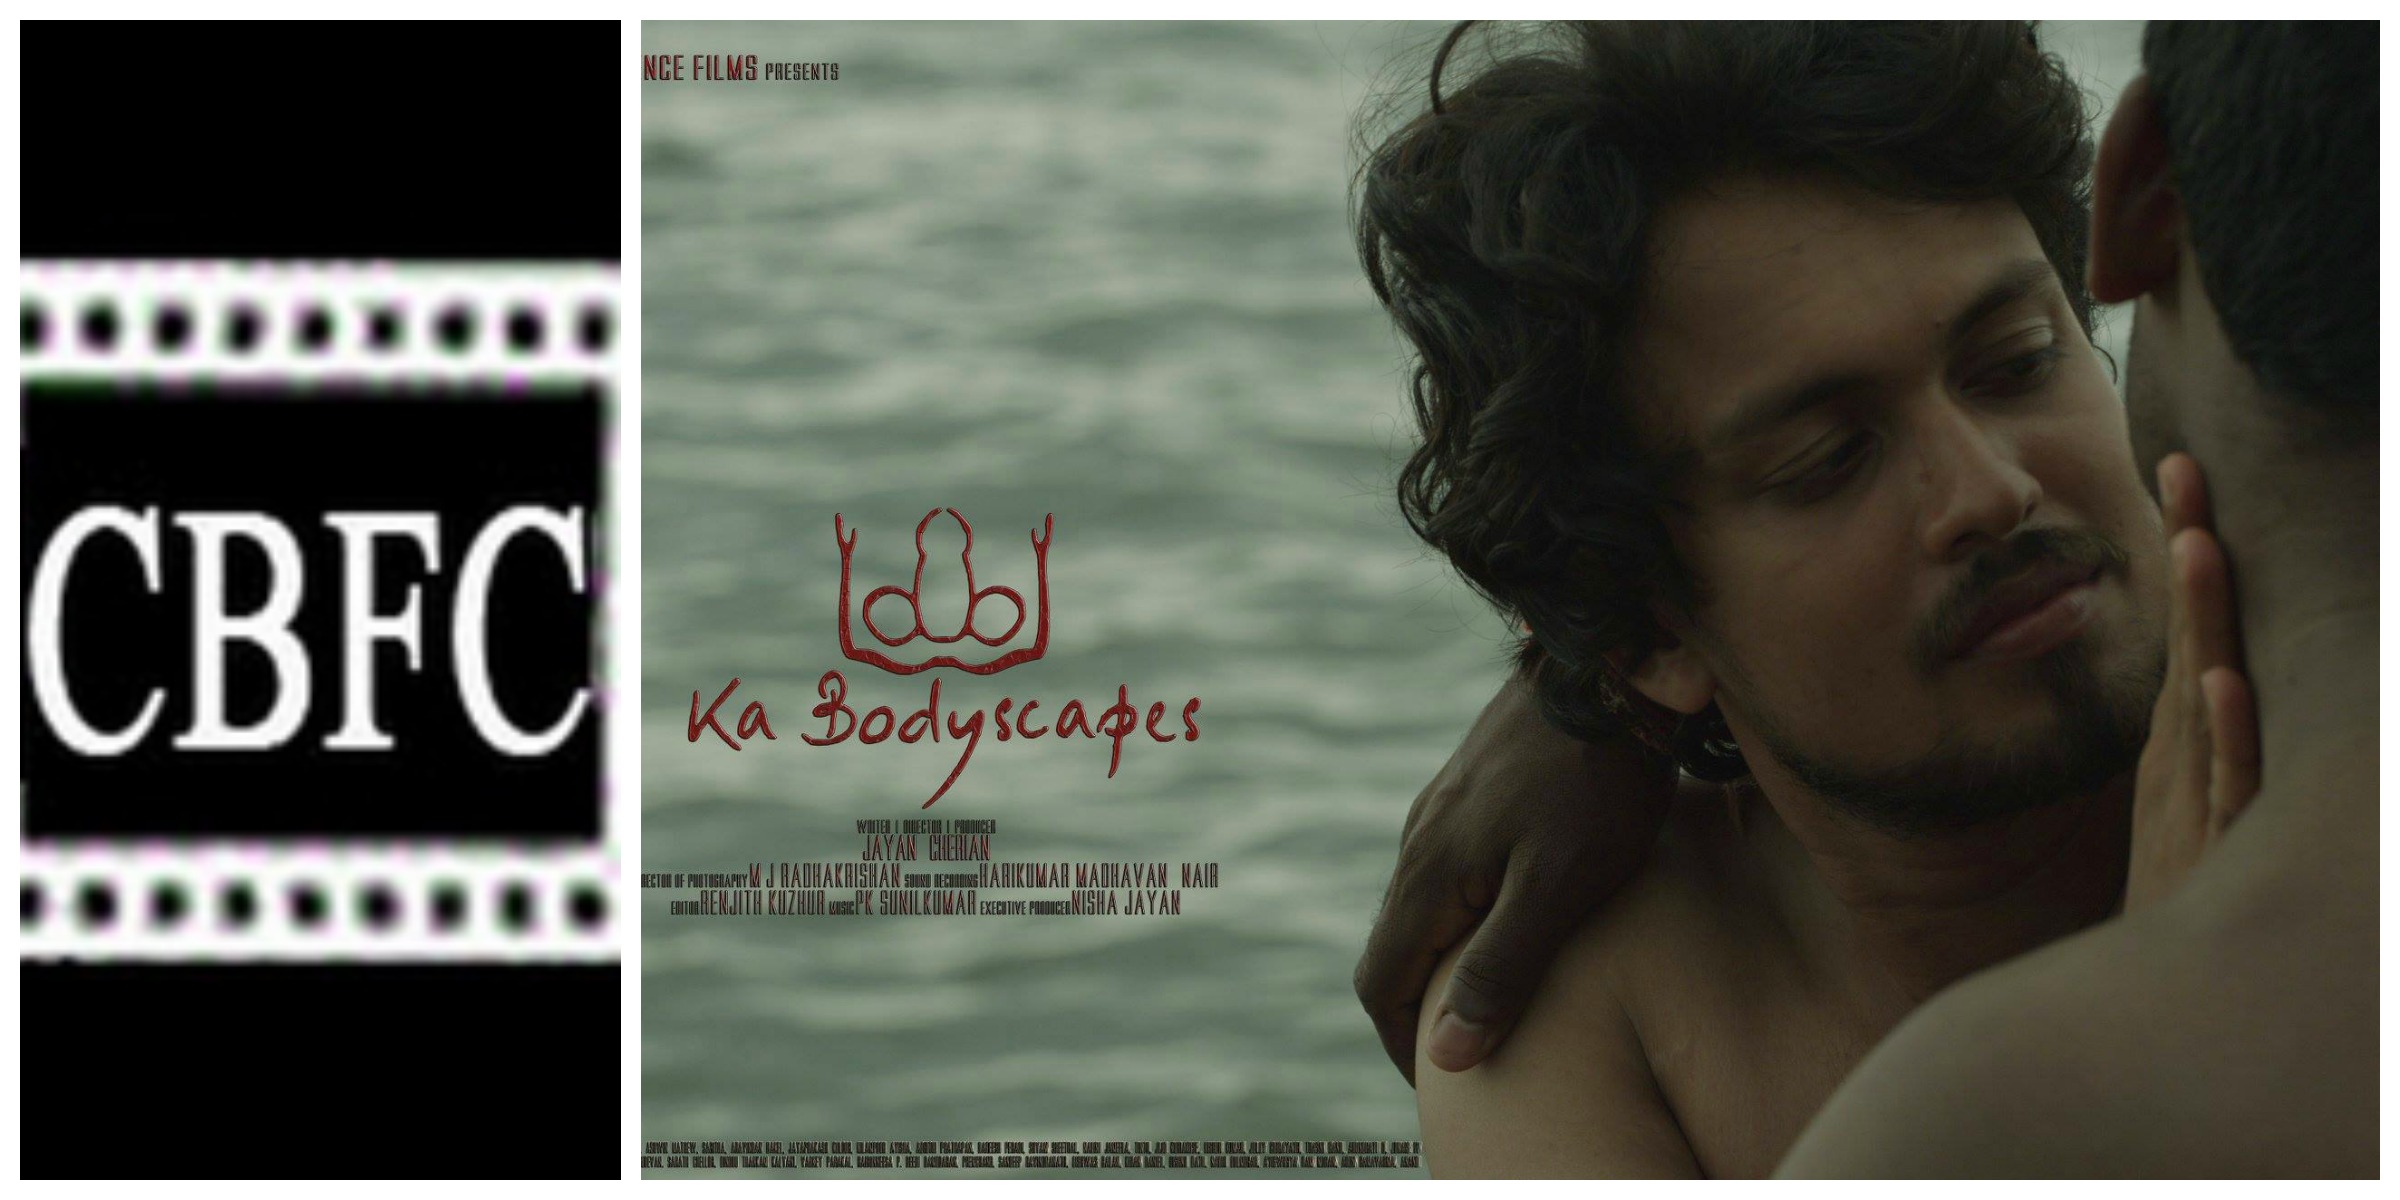 Ka Bodyscapes Denied Certificate For Gay Theme